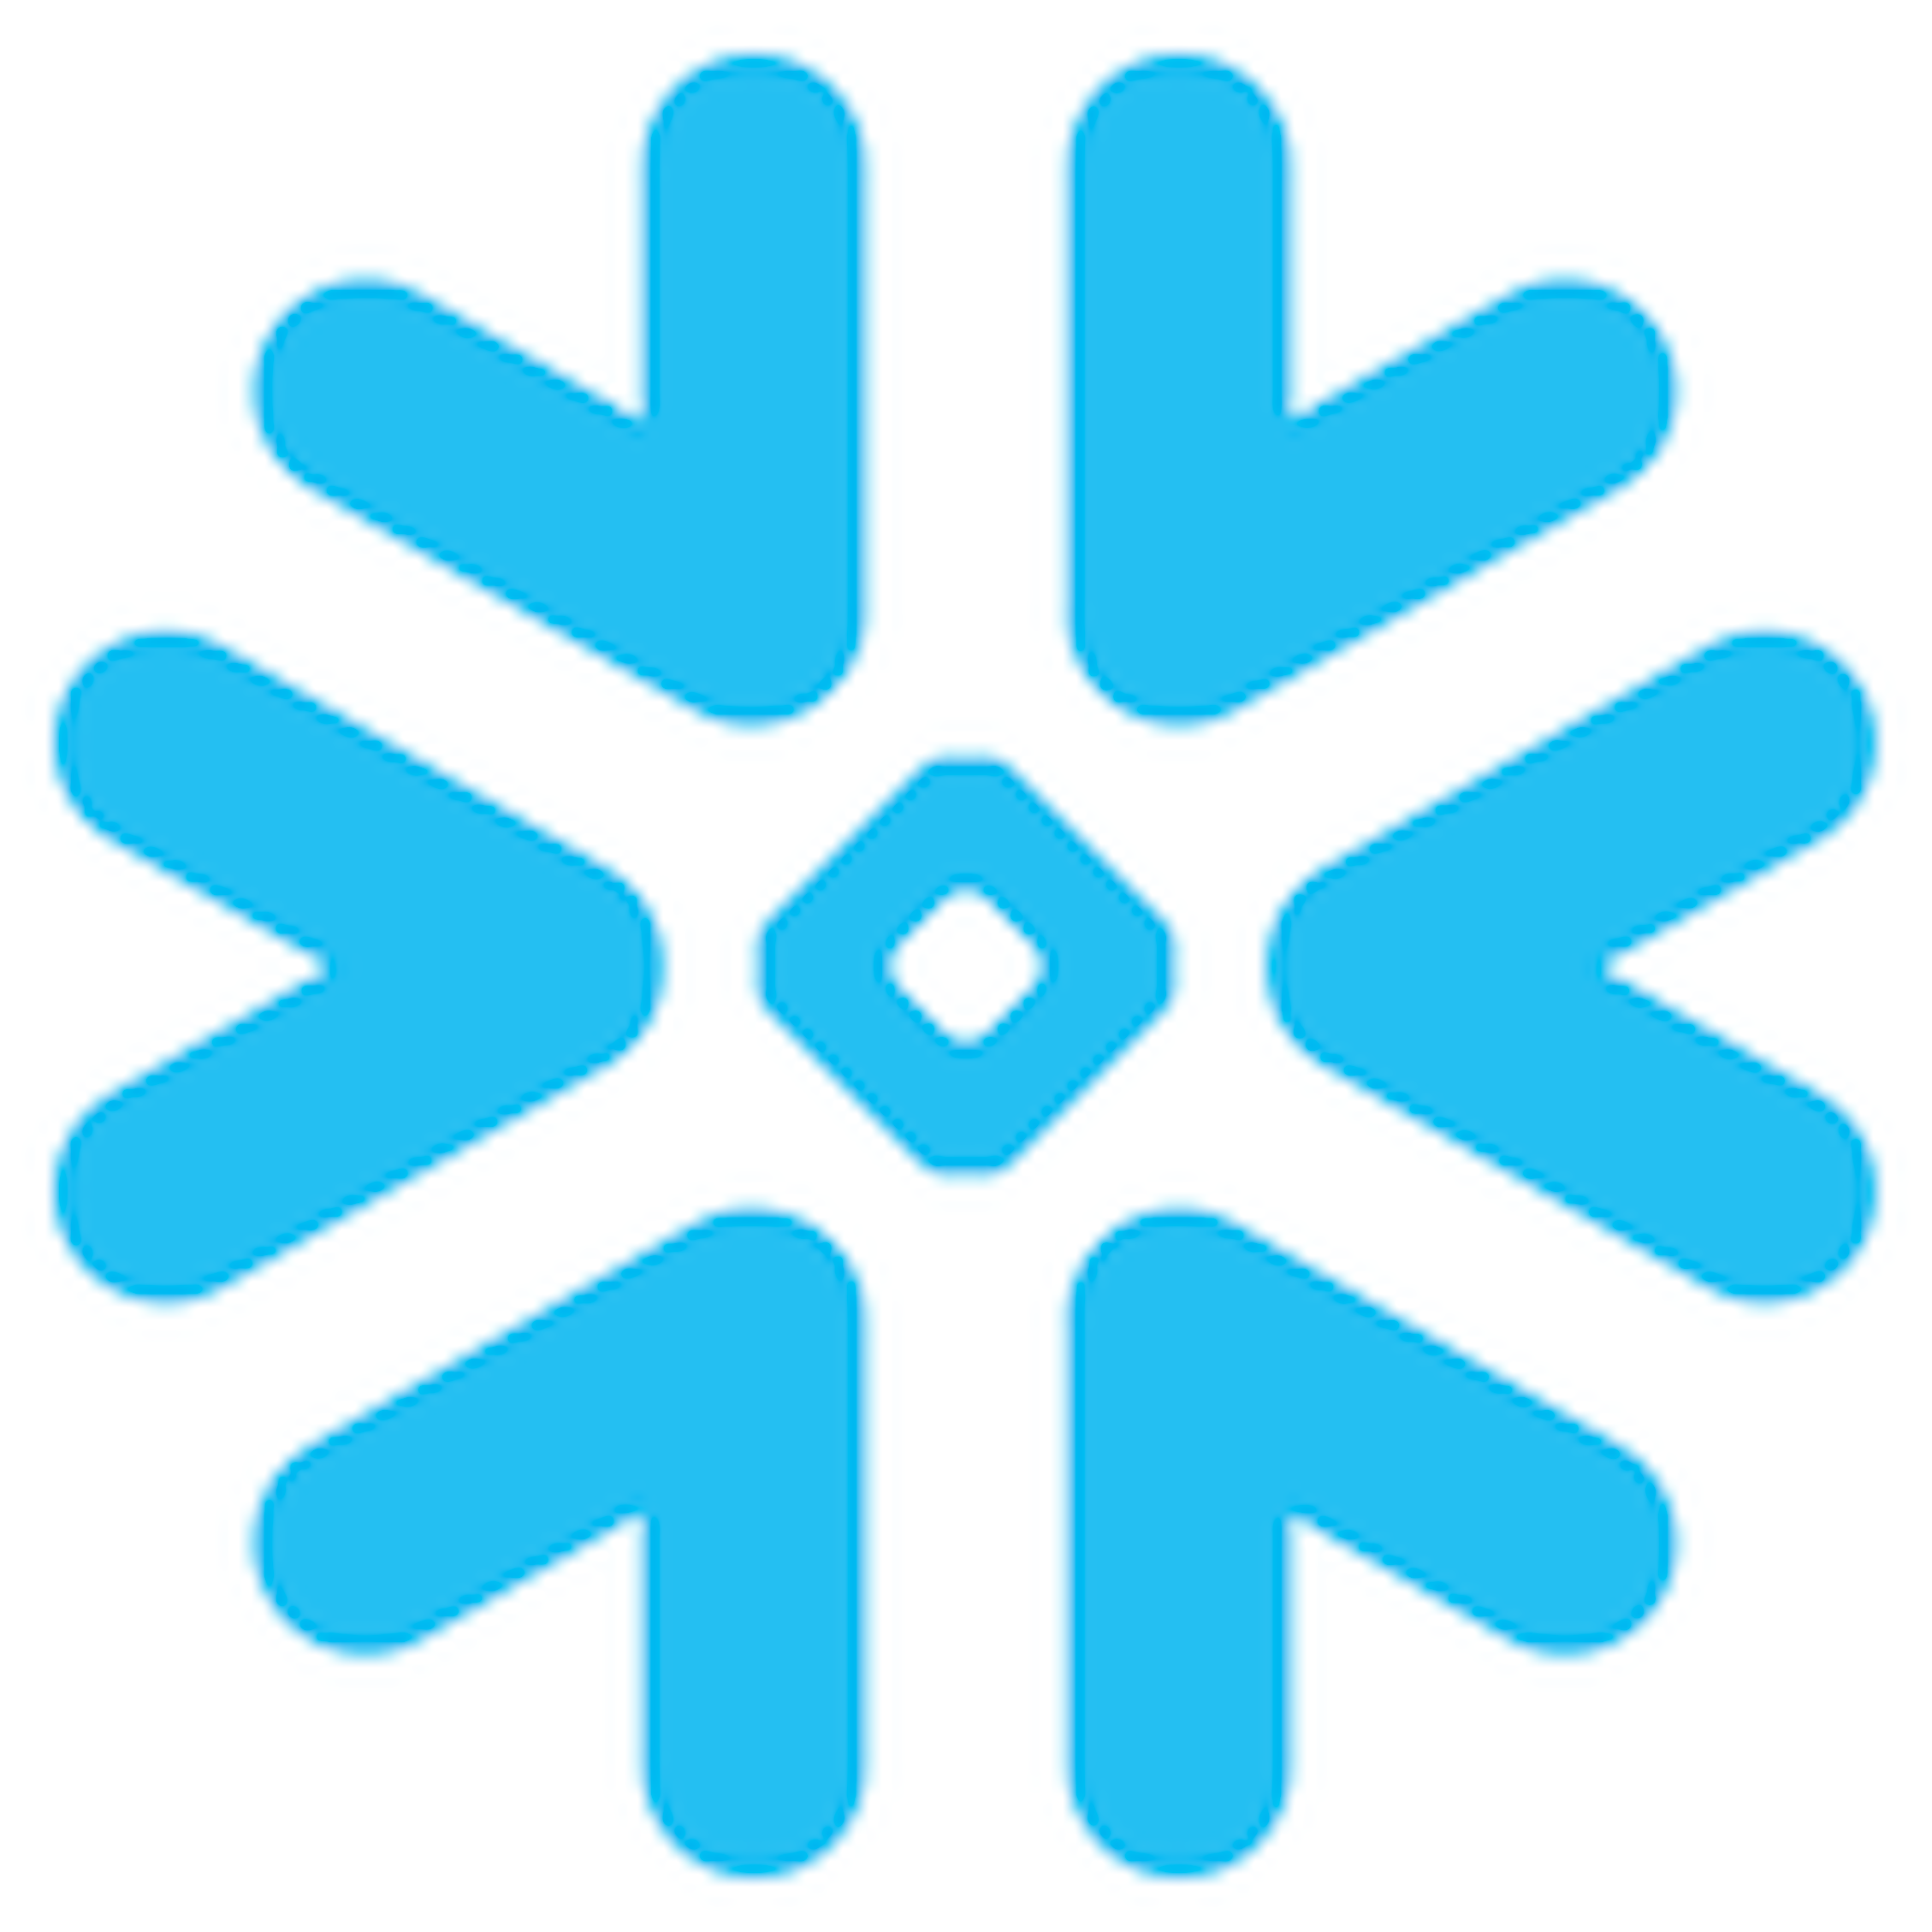 snowflake-pricing-features-reviews-alternatives-getapp